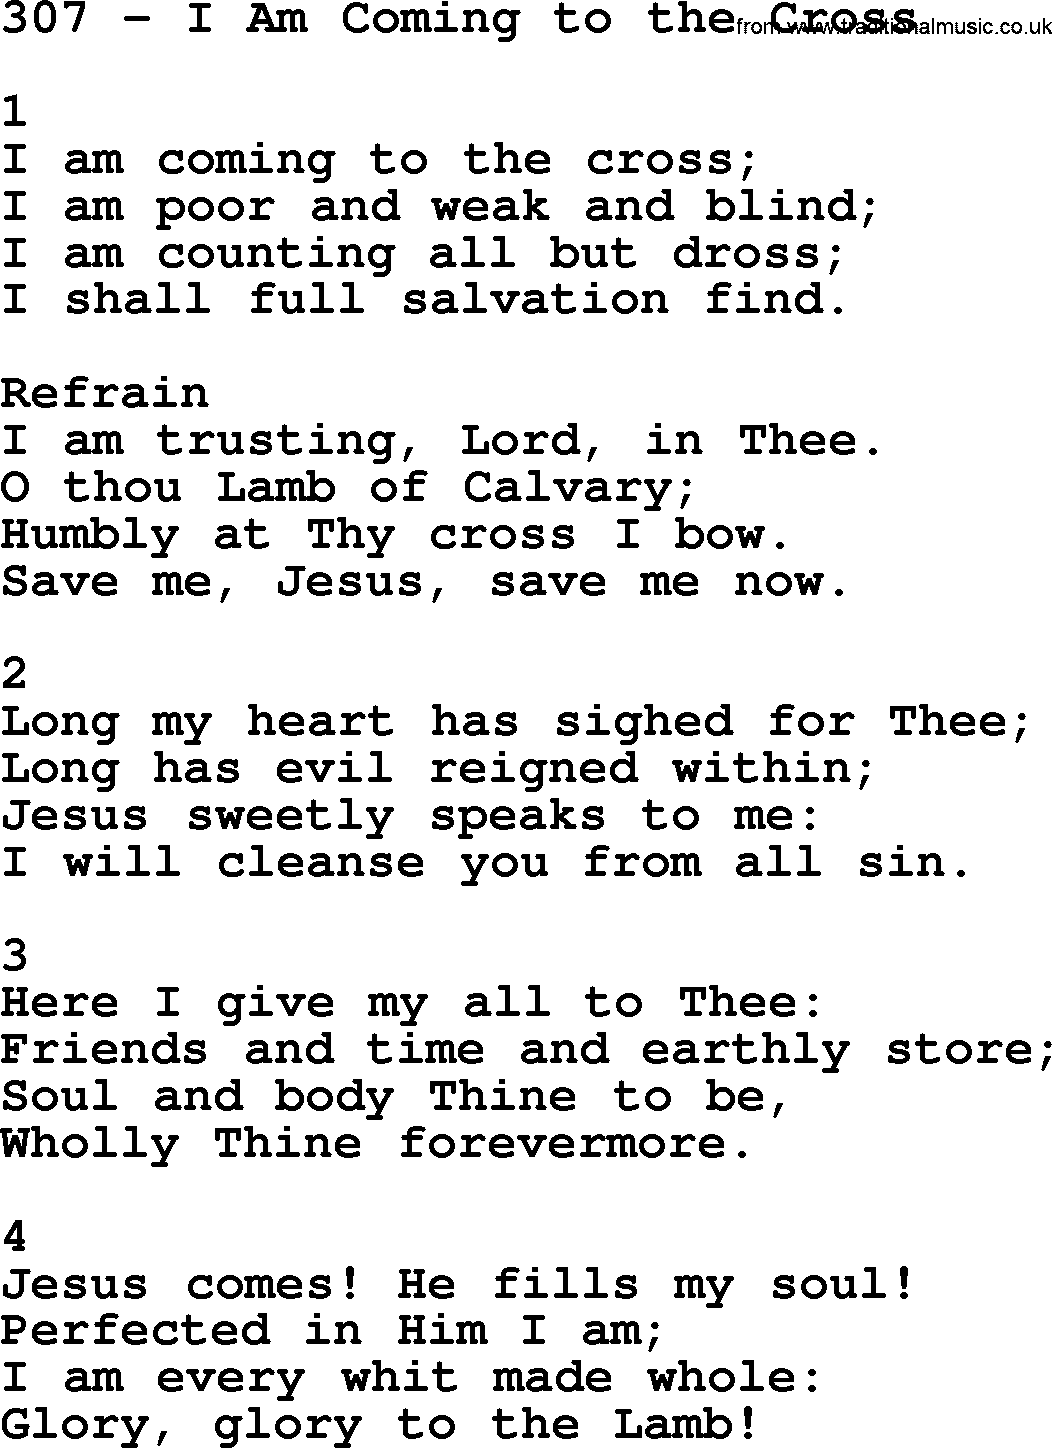 Adventist Hymnal, Song: 307-I Am Coming To The Cross, with Lyrics, PPT ...